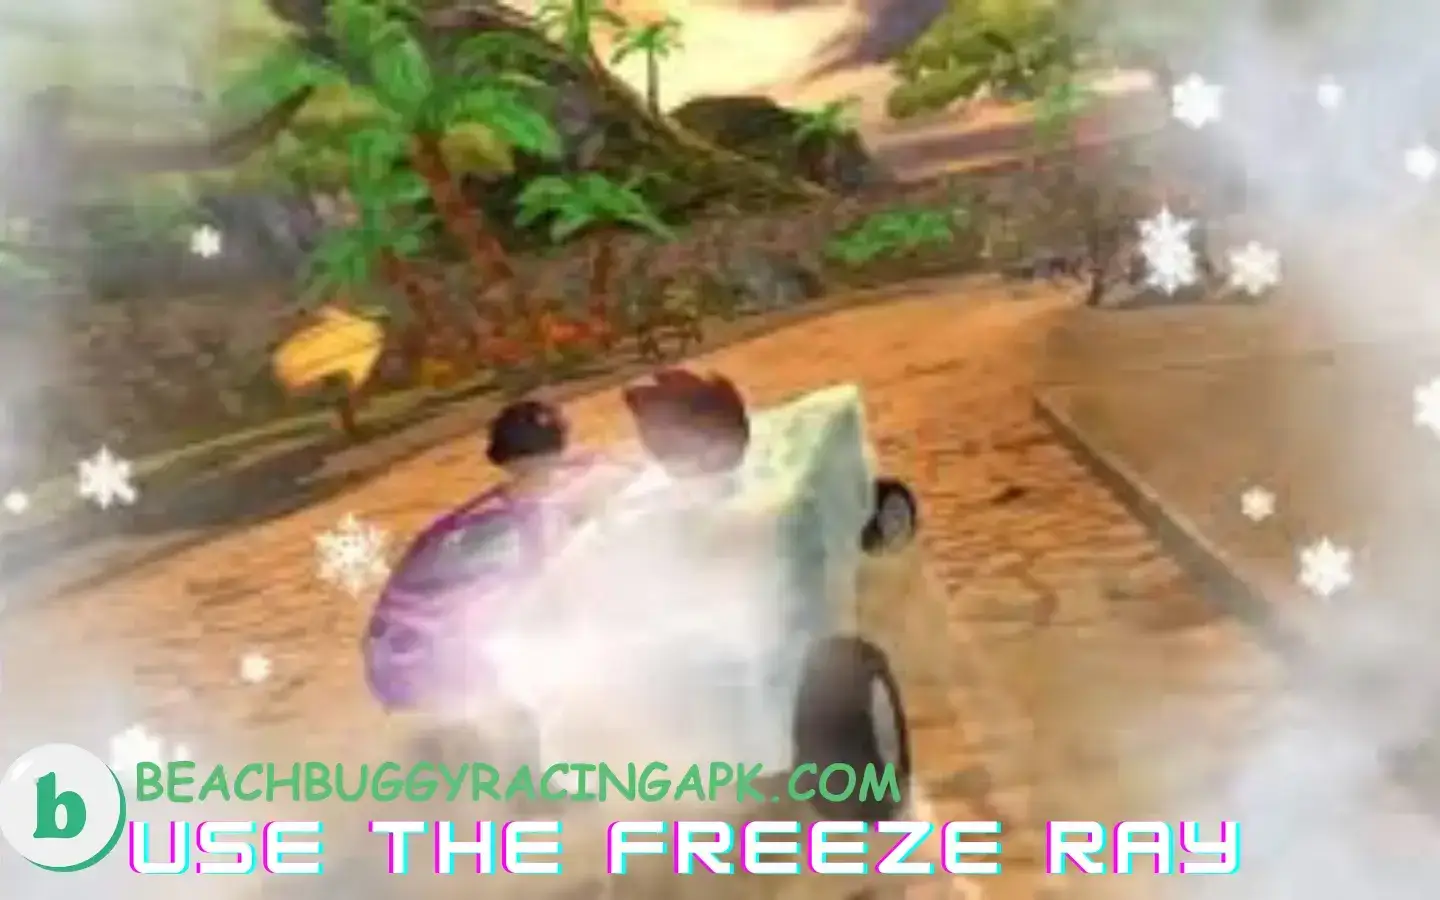 How to Use the Freeze Ray on Someone-Who-Is-on-Fire-in-Beach-Buggy-Racing